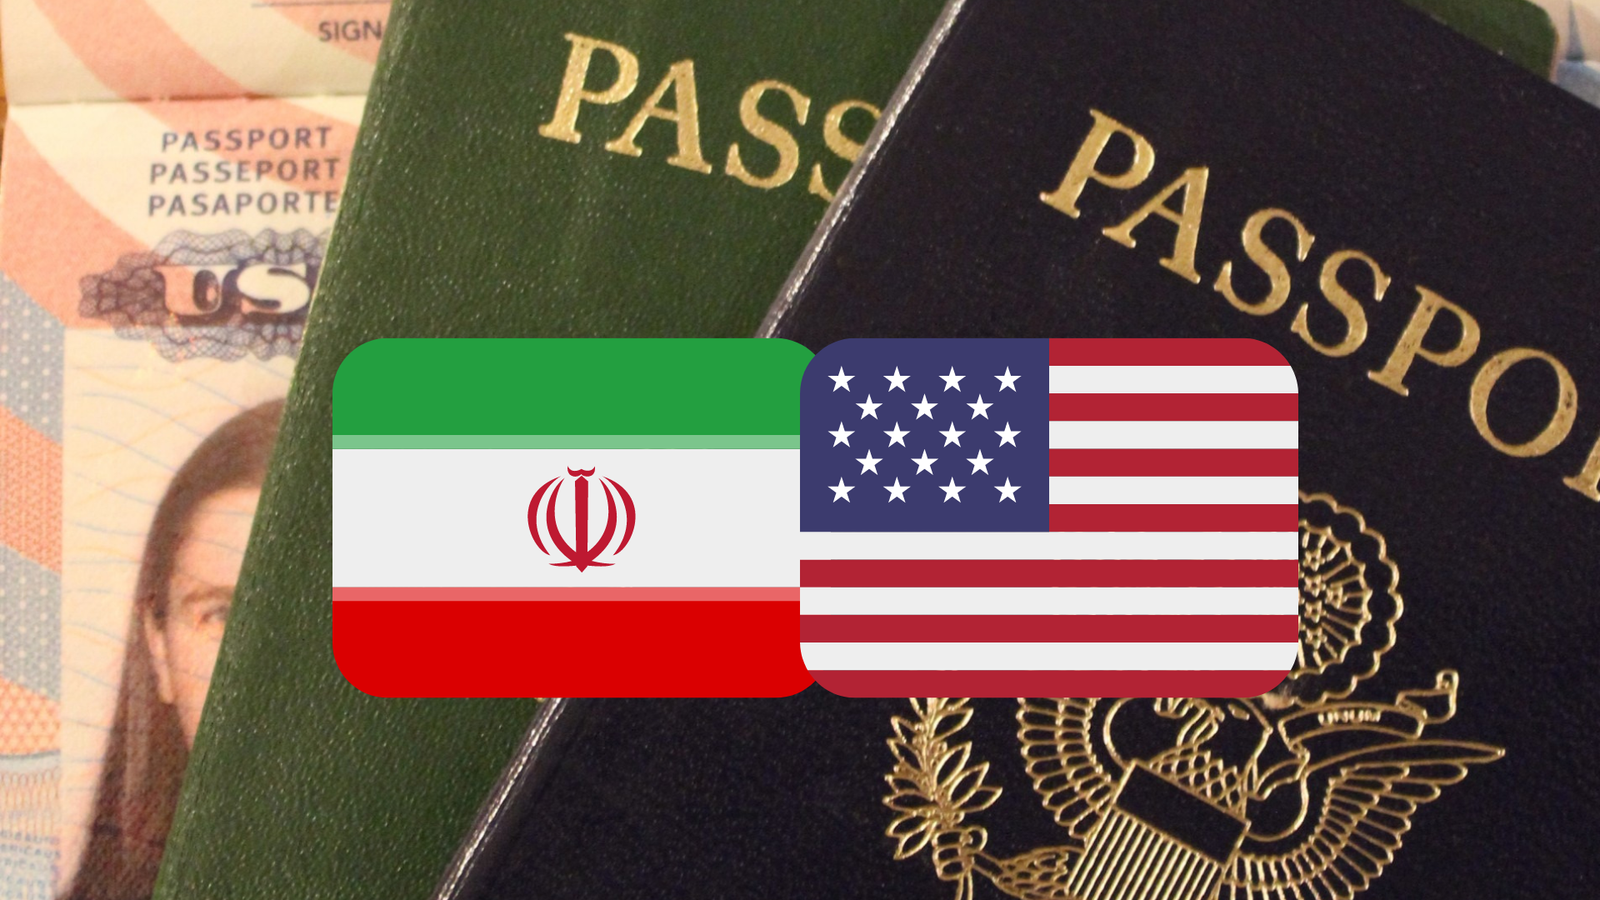 Three passports with the flags of both the United States and Iran.